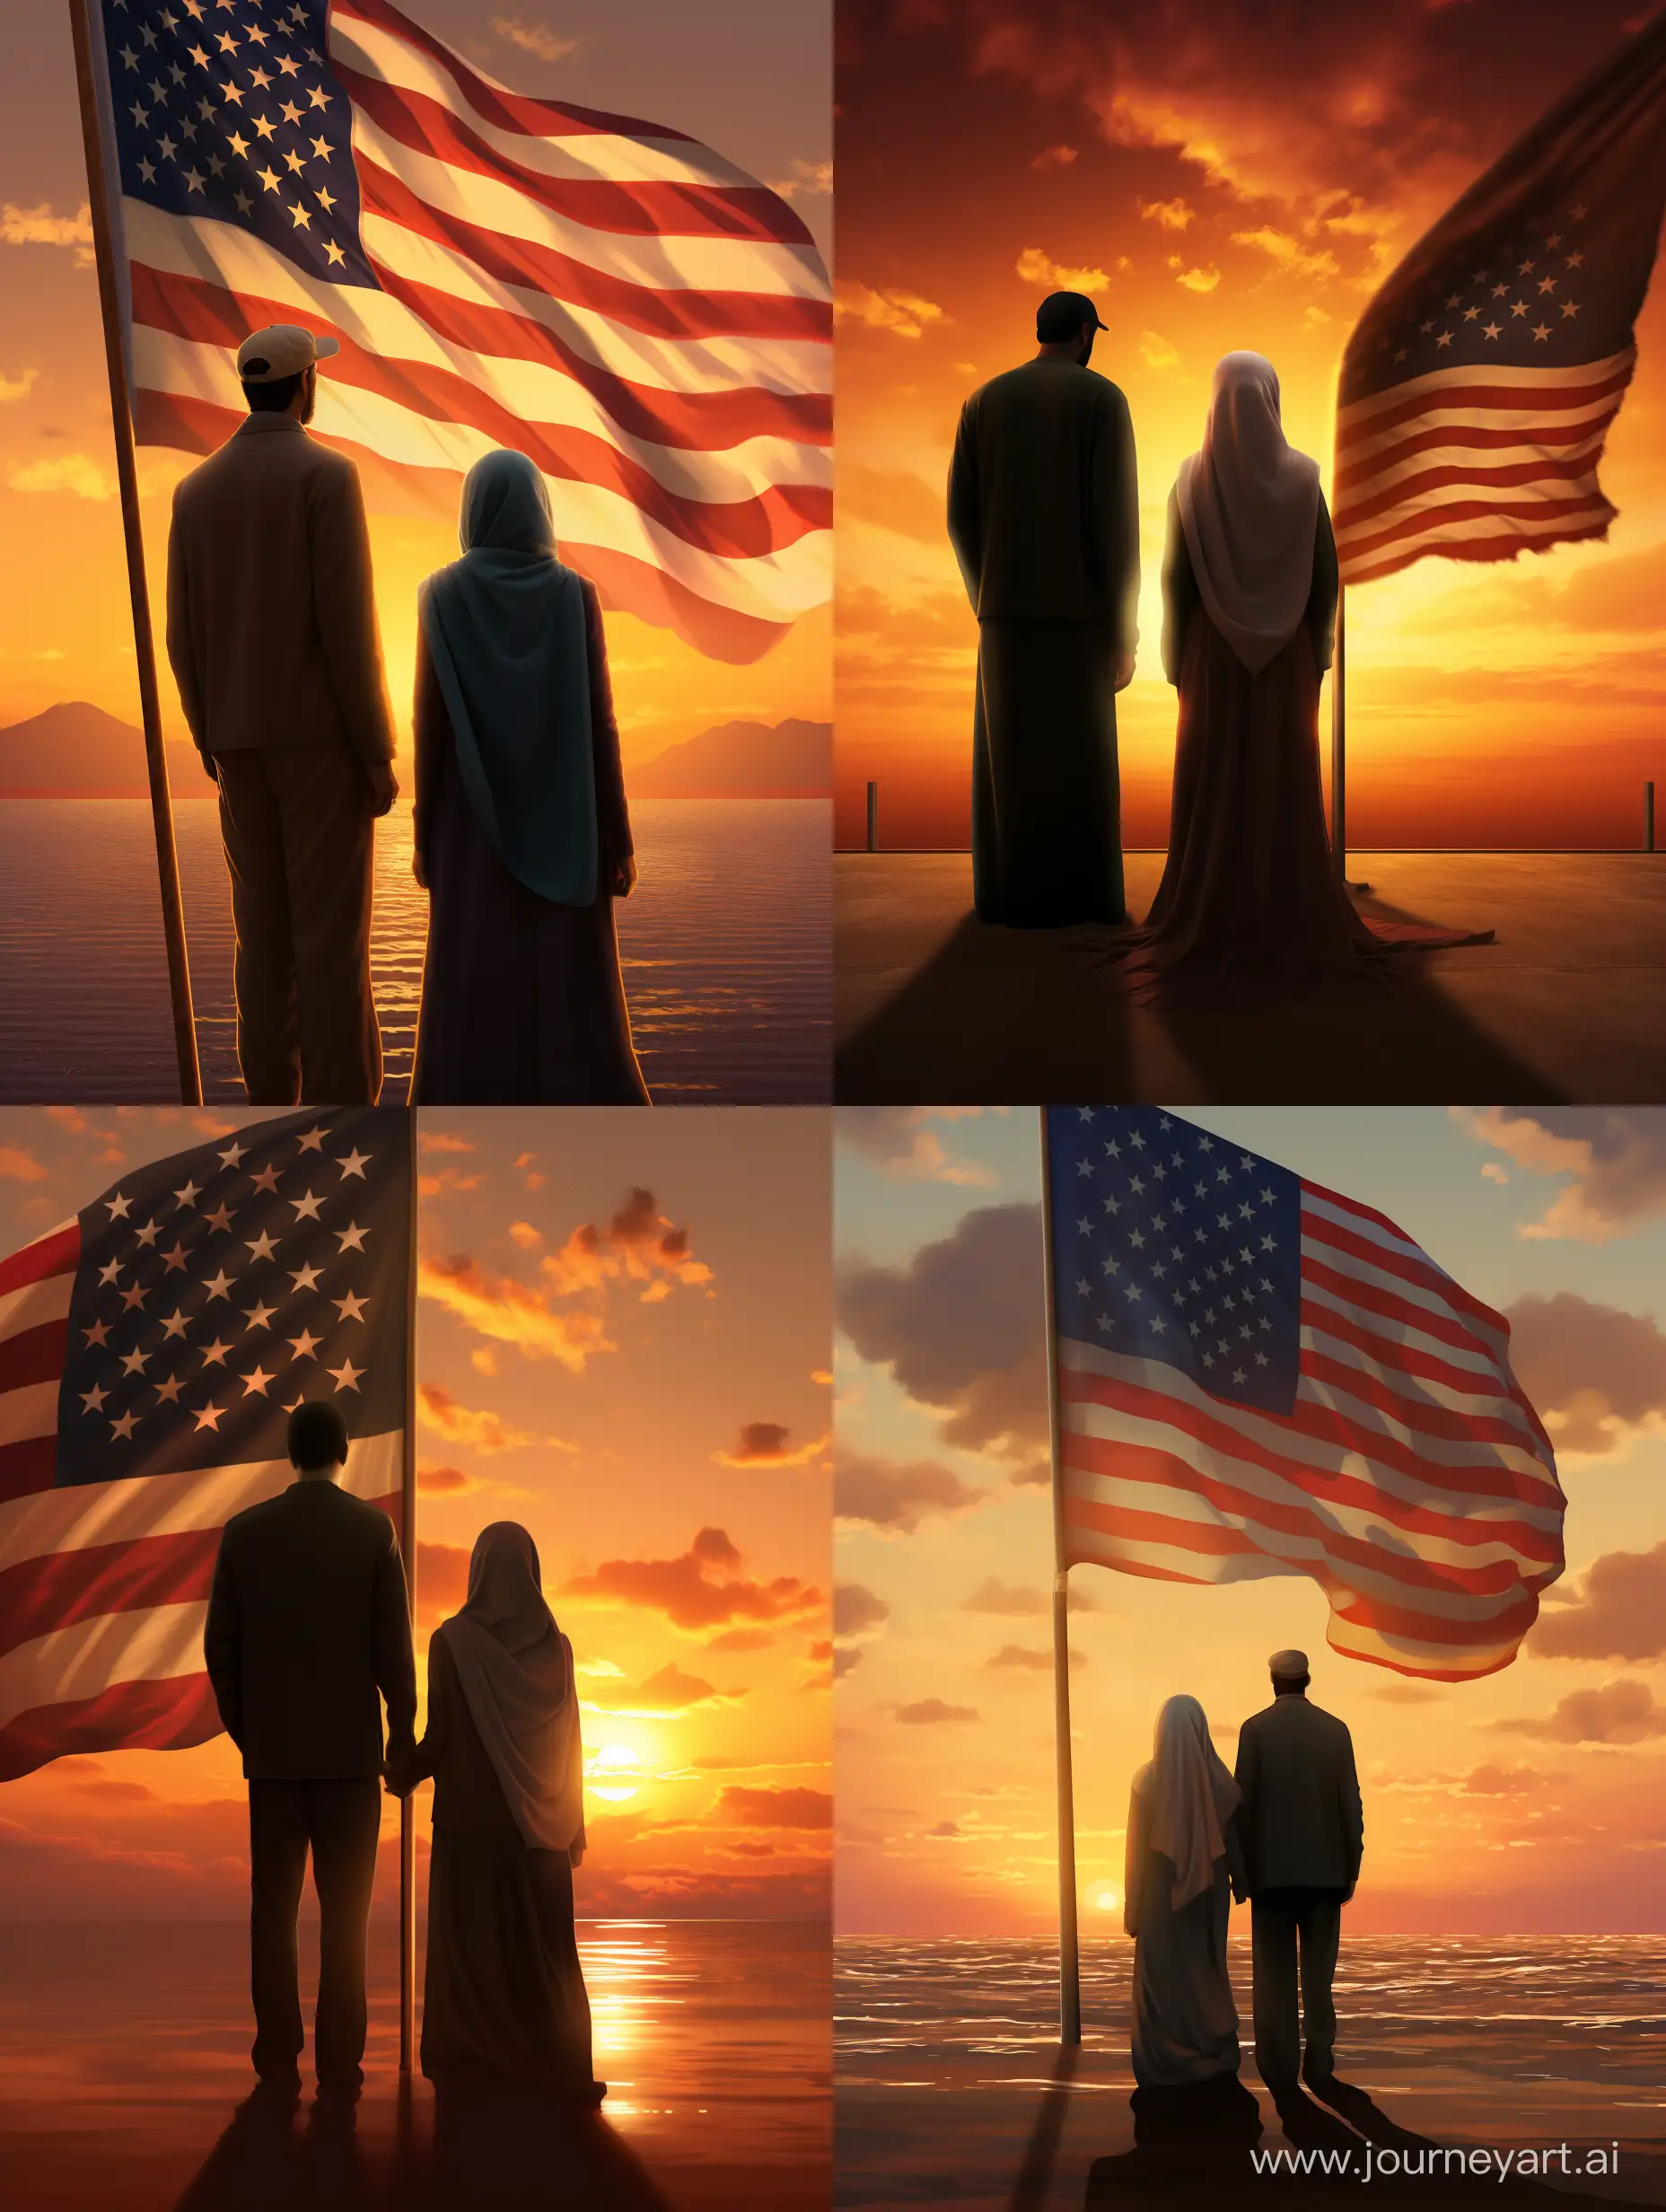 Pledge of allegiance of two Muslim people facing the sunset